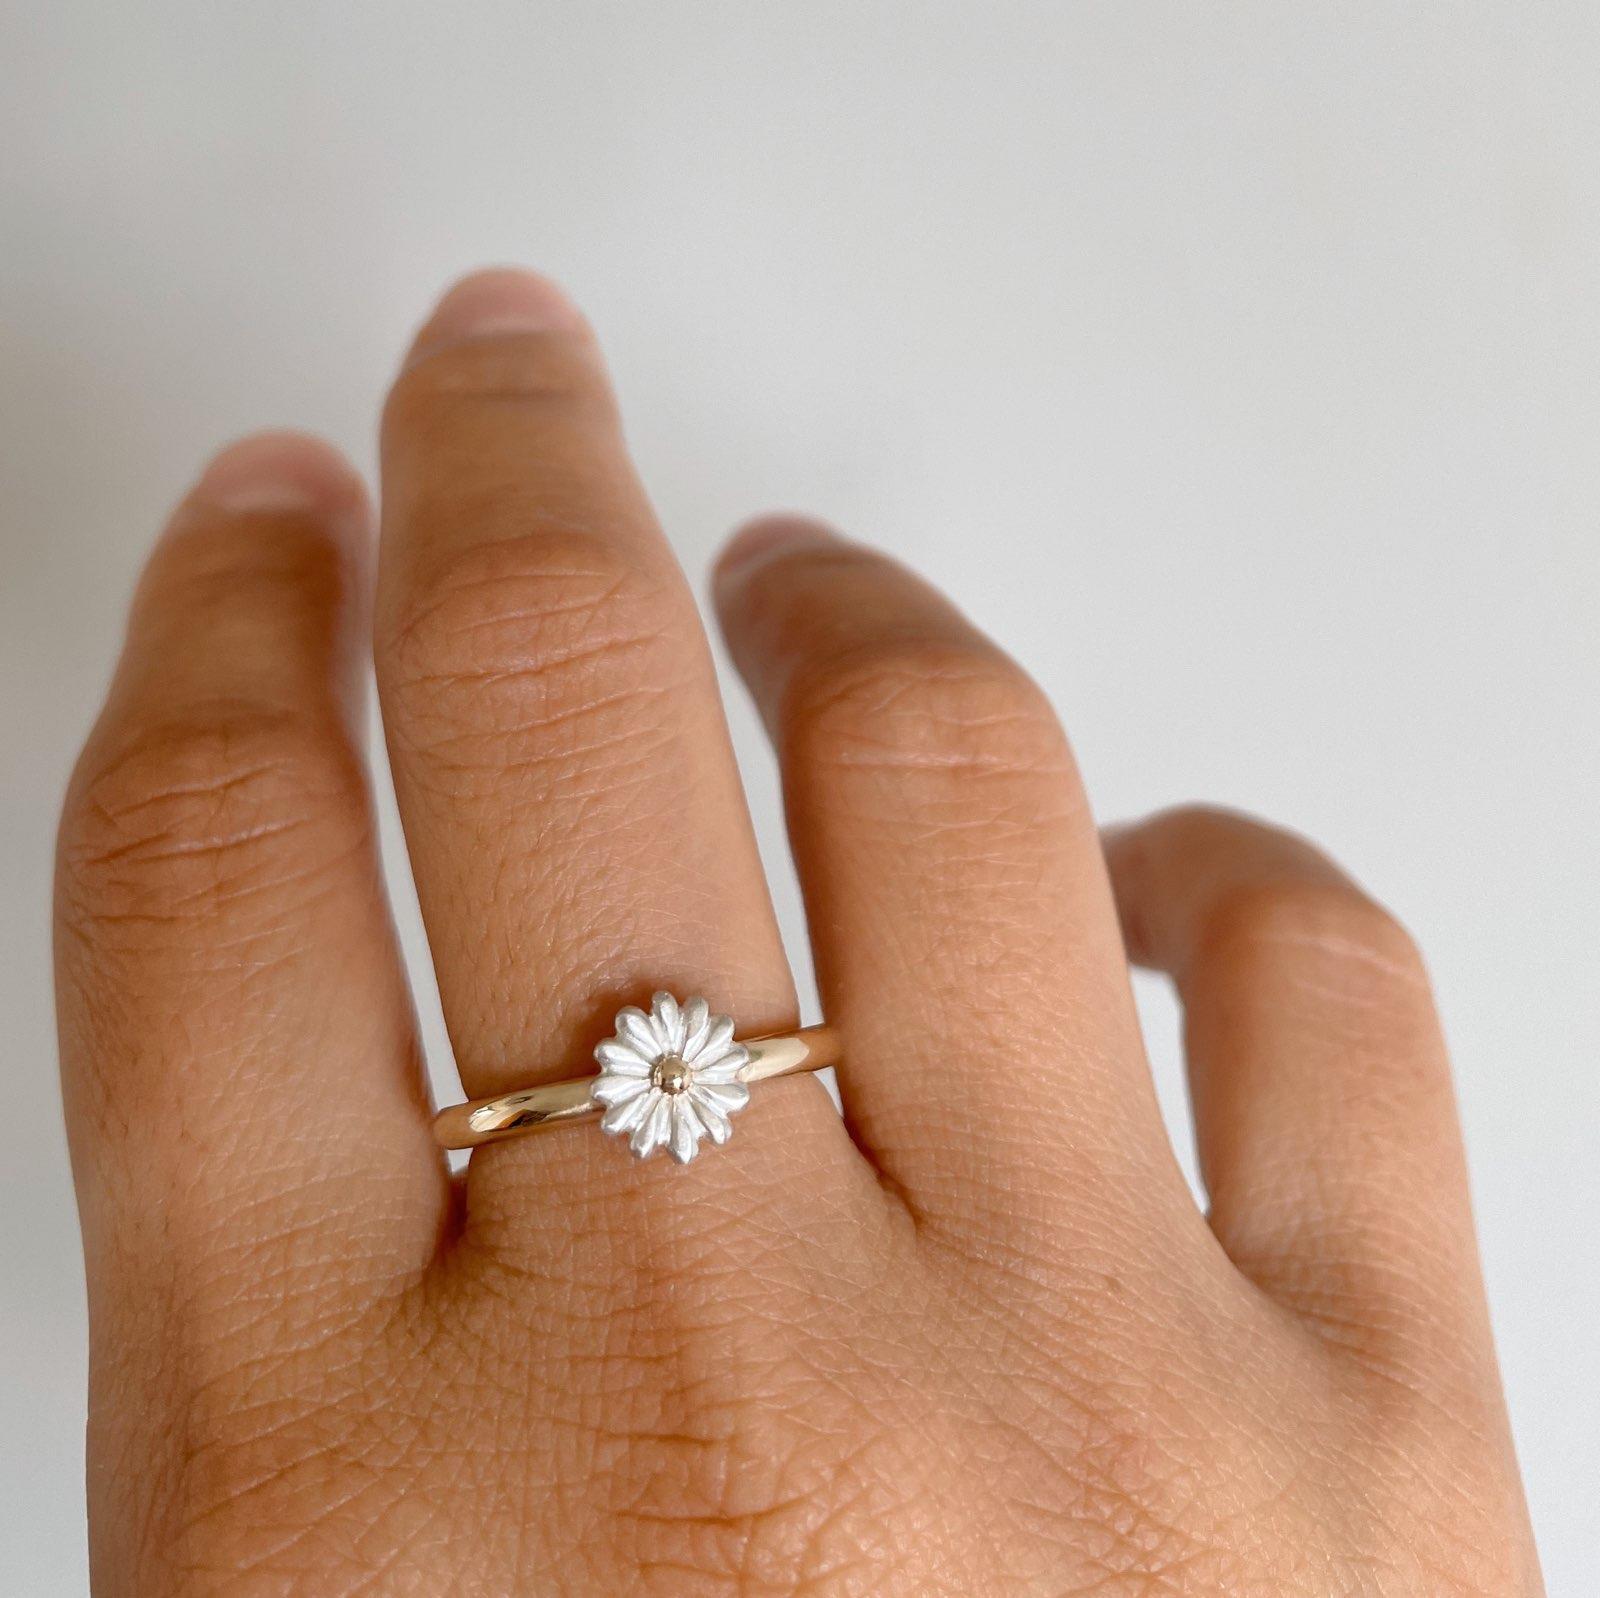 For Sale:  Small Daisy Ring/ 9ct Yellow Gold and Silver 6